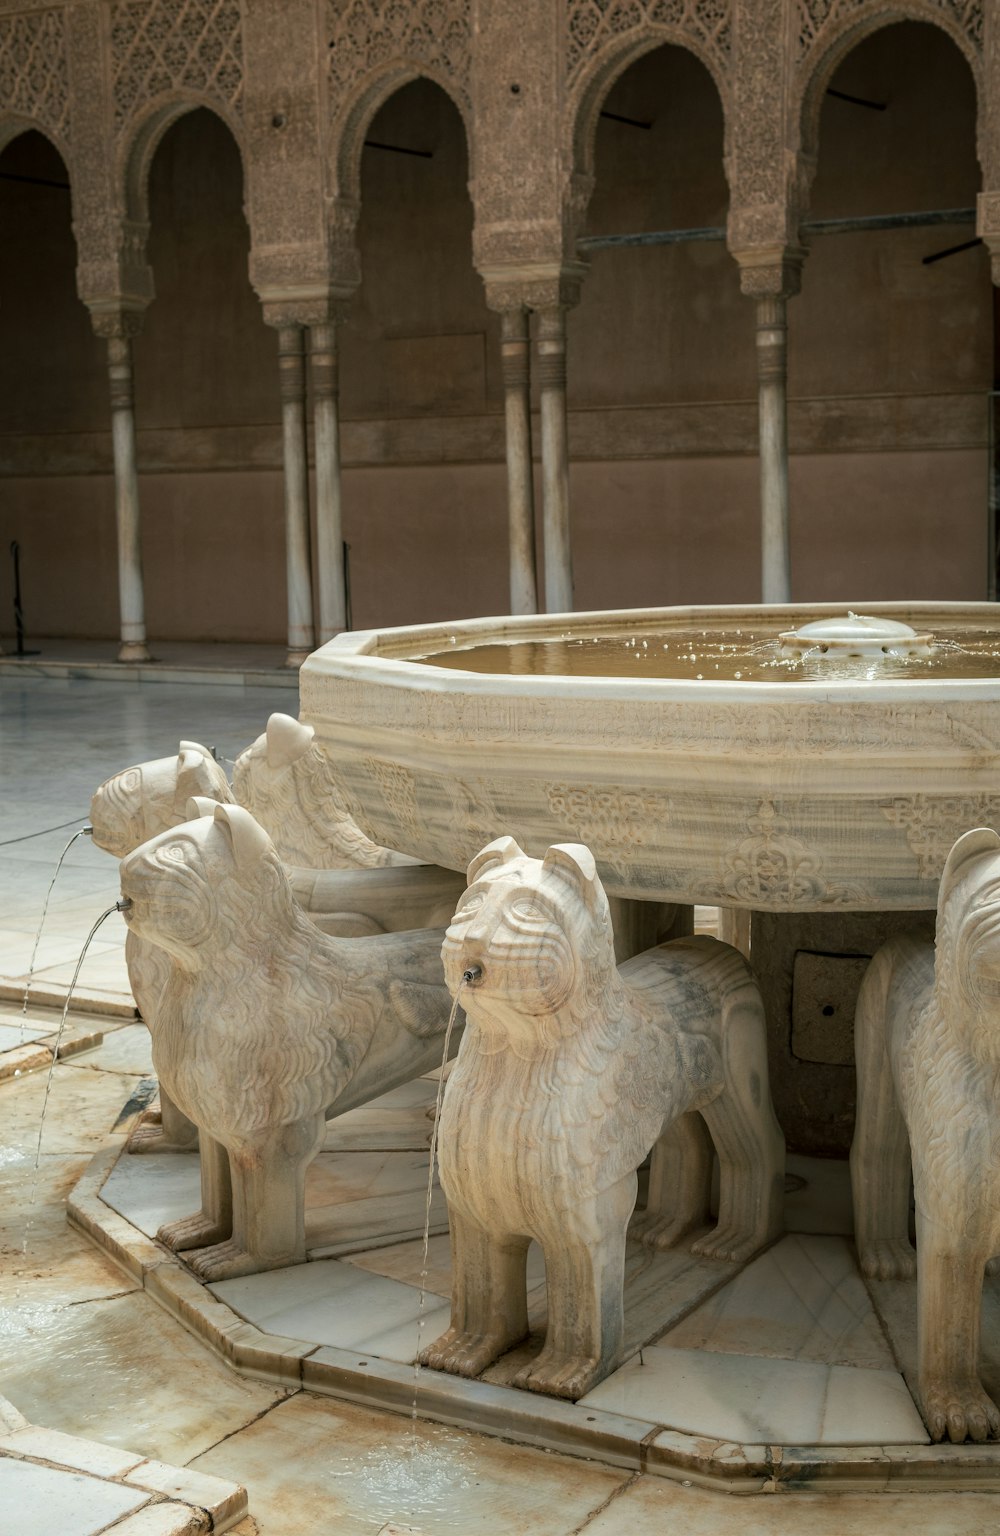 a fountain with statues of animals around it